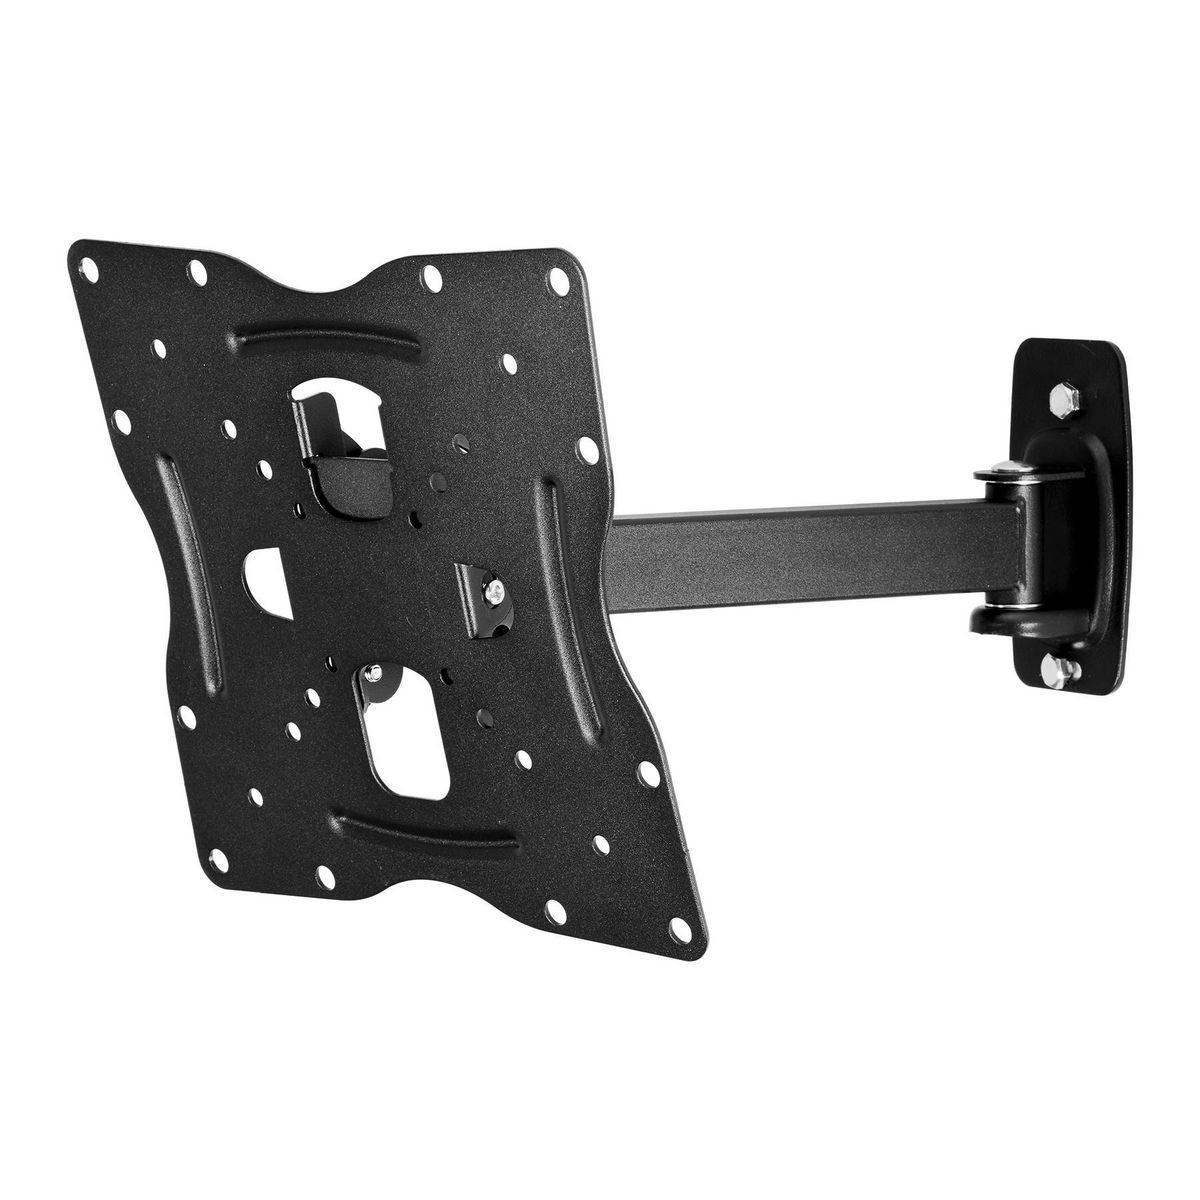 ARMSTRONG 17 in. to 42 in. Swivel/Tilt TV Wall Mount